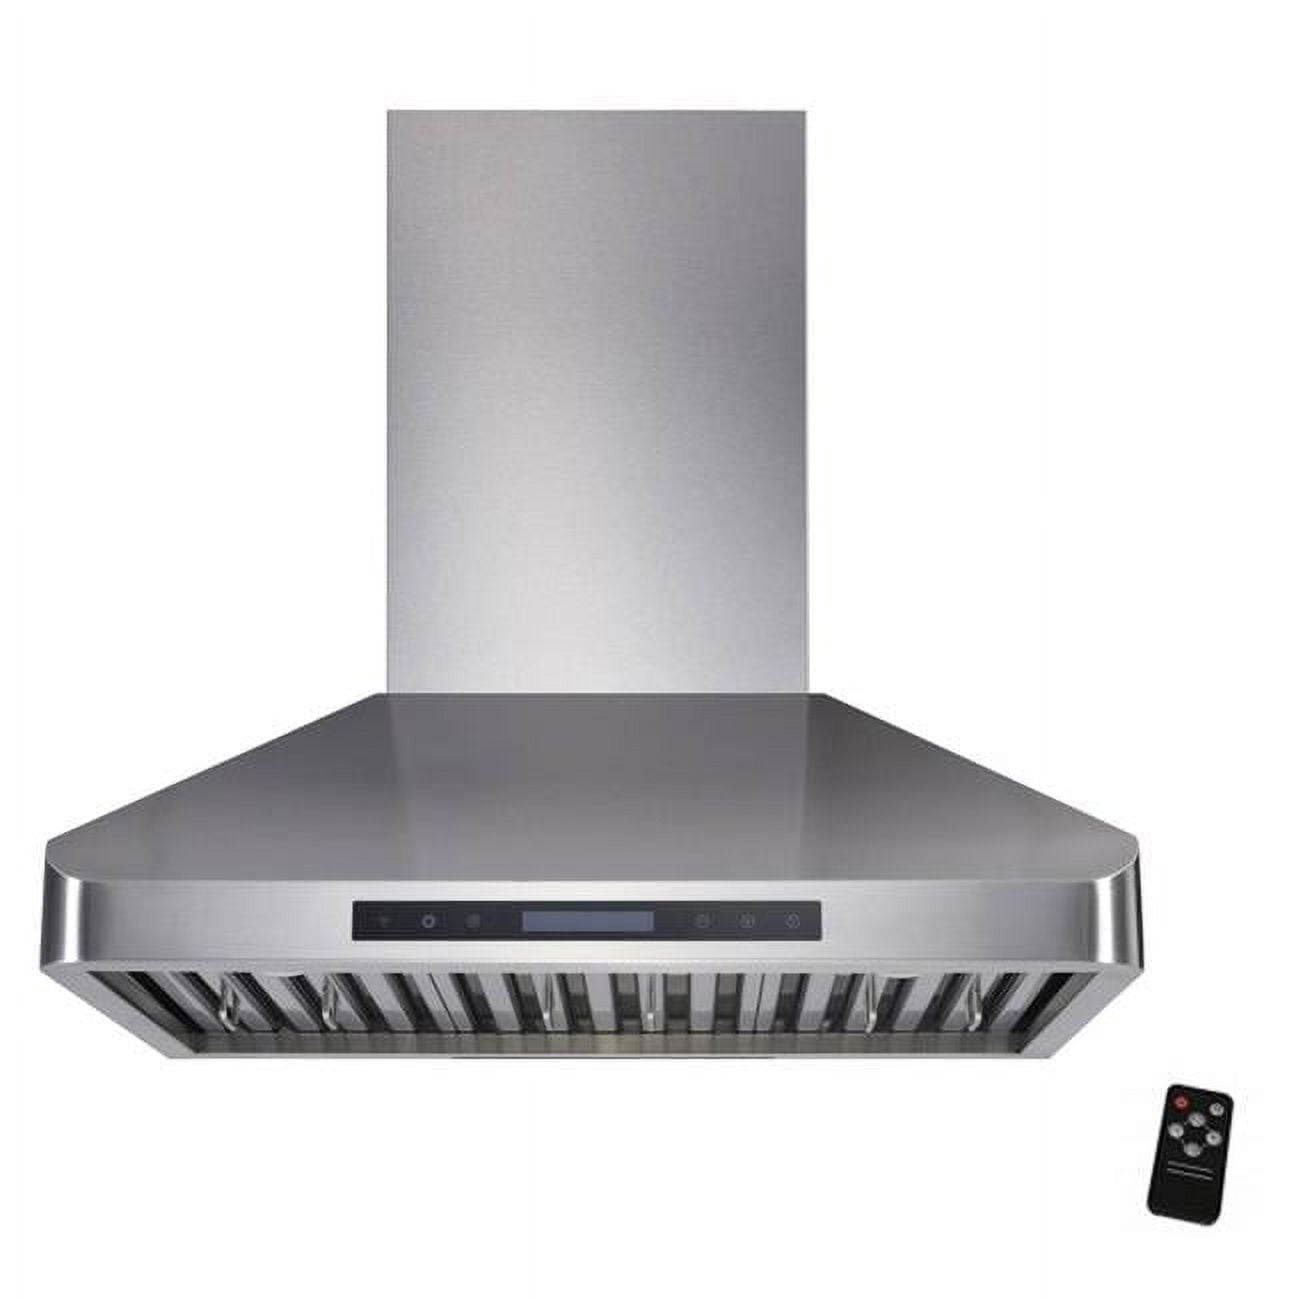 Picture of Awoco RH-WT-30 Awoco RH-WT-30 Wall Mount 4 Speeds&#44; 6 Top Round Vent Stainless Steel Range Hood